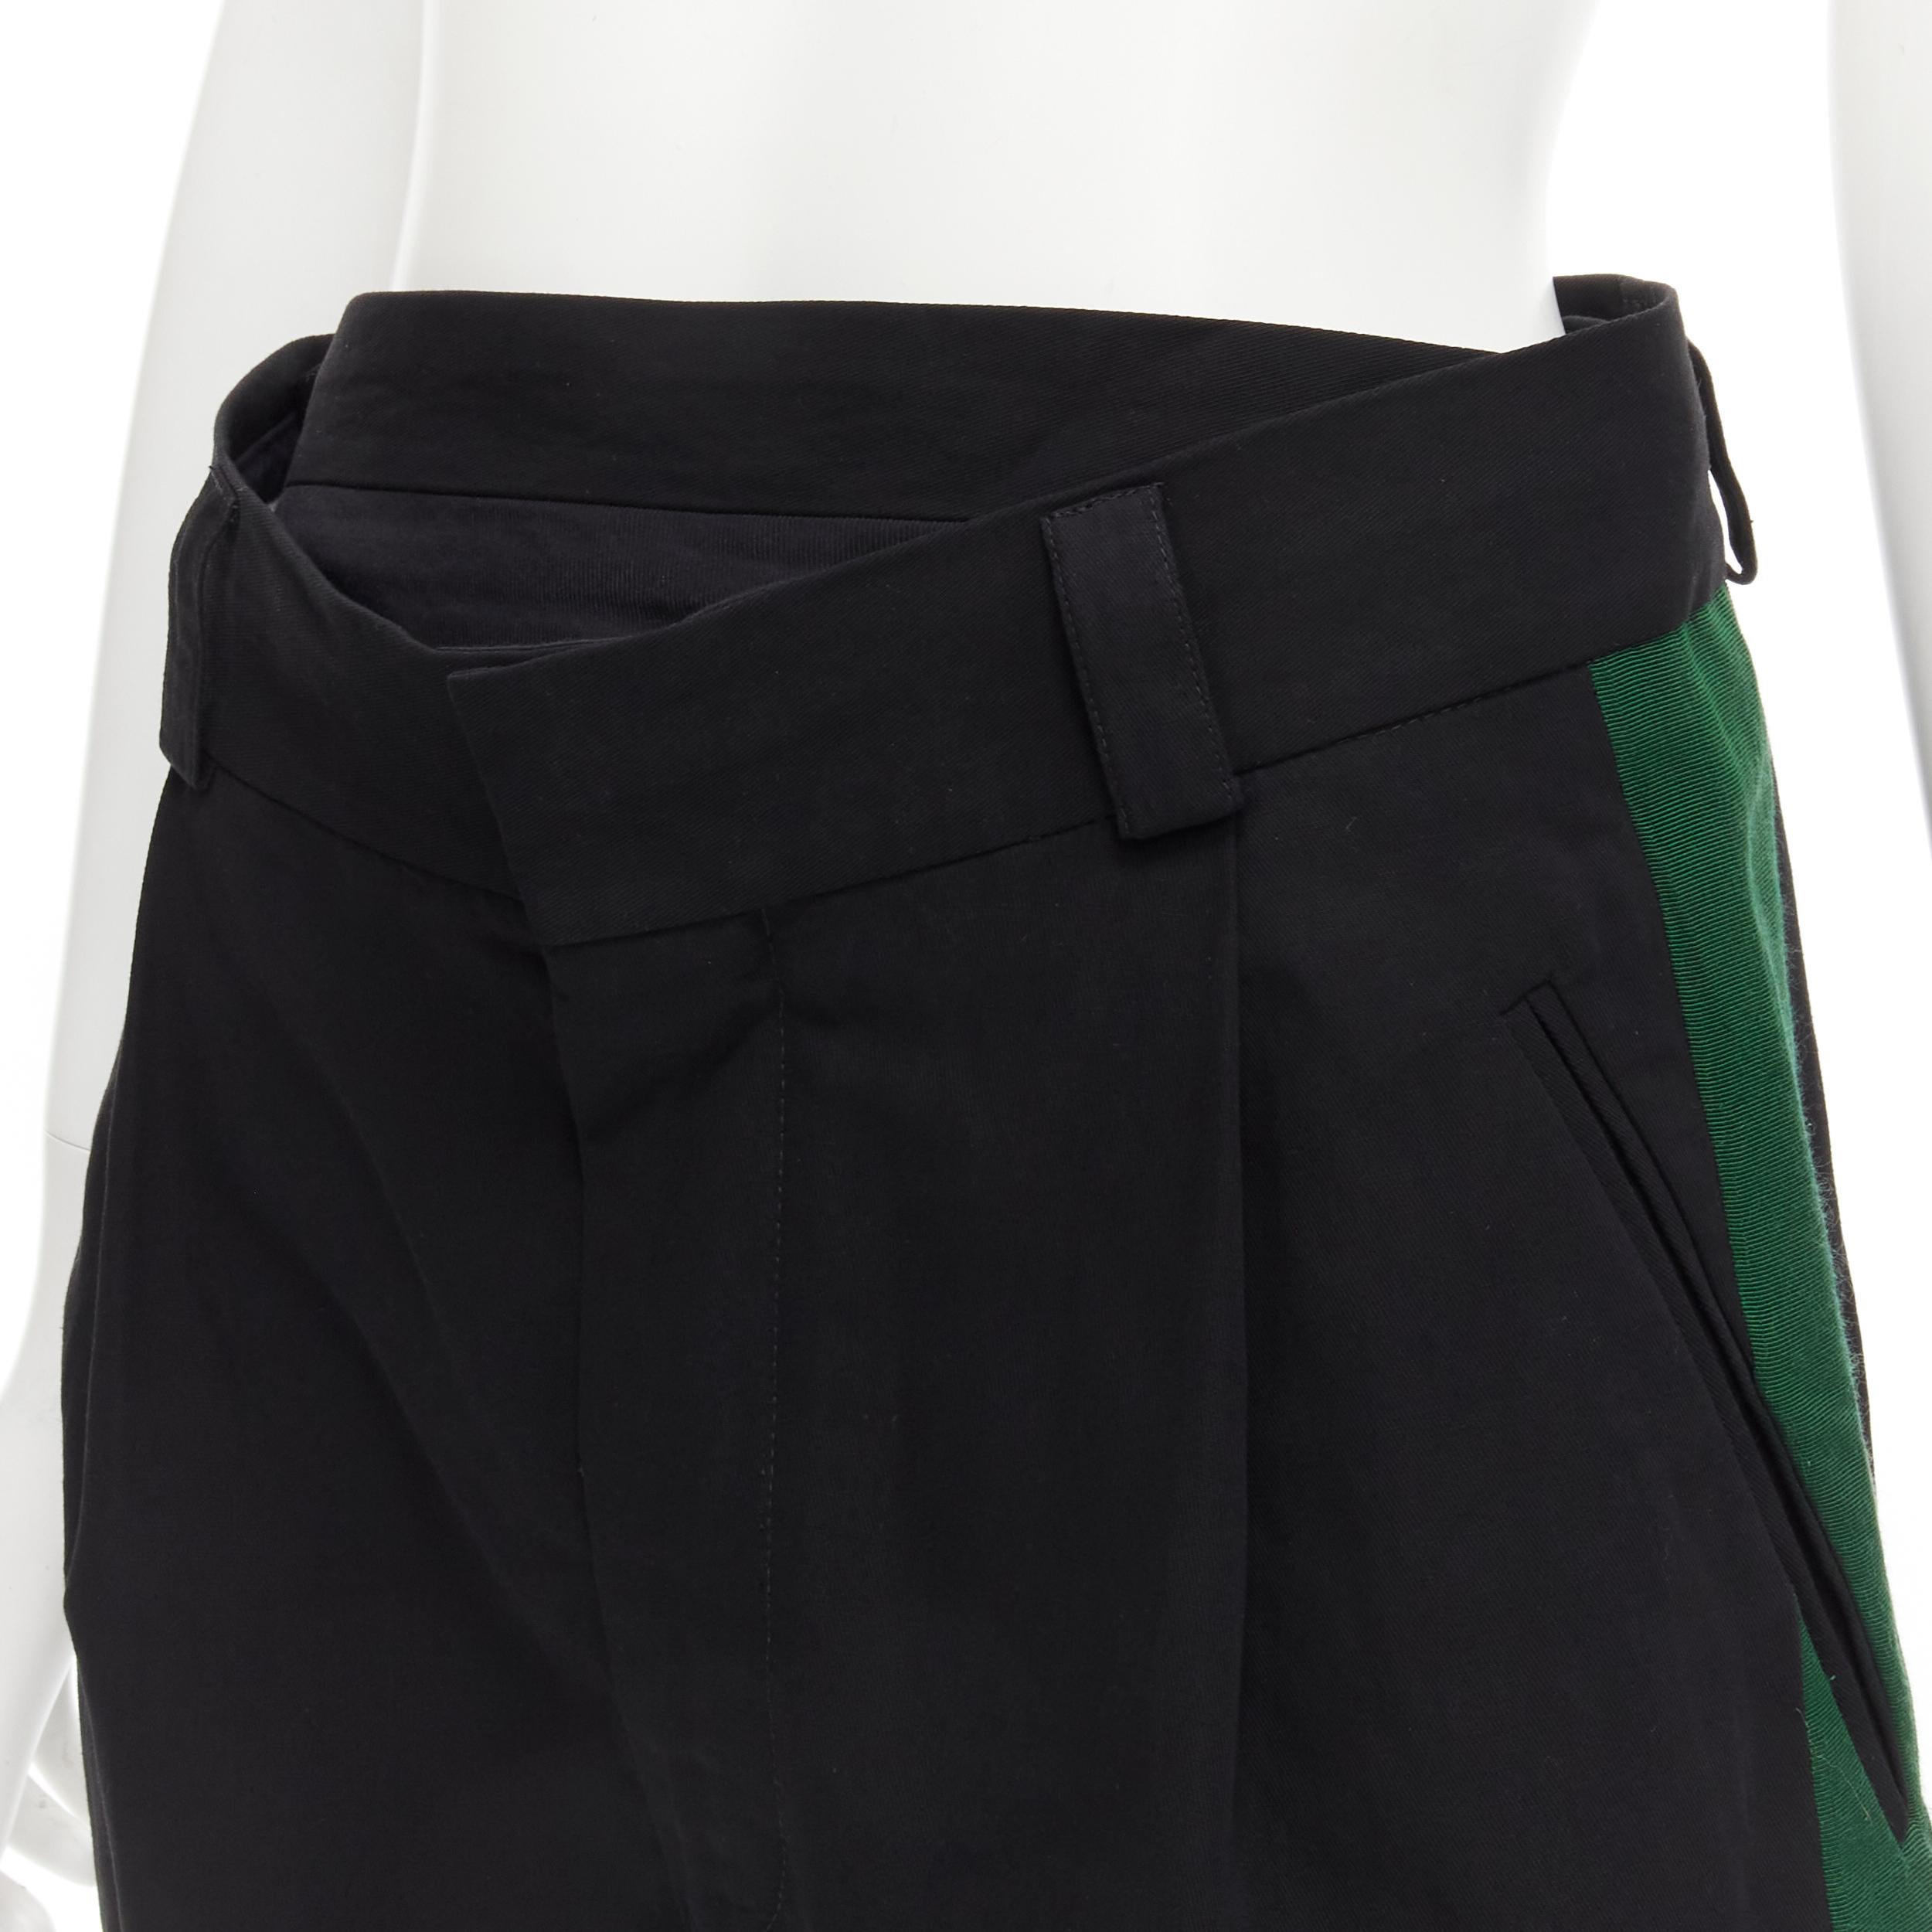 HAIDER ACKERMANN black green grosgrain trimmed side pleated front shorts FR34 XS 
Reference: MELK/A00064 
Brand: Haider Ackermann 
Material: Rayon 
Color: Black 
Pattern: Solid 
Closure: Zip 
Extra Detail: 3-pockets. 
Made in: Romania 

CONDITION: